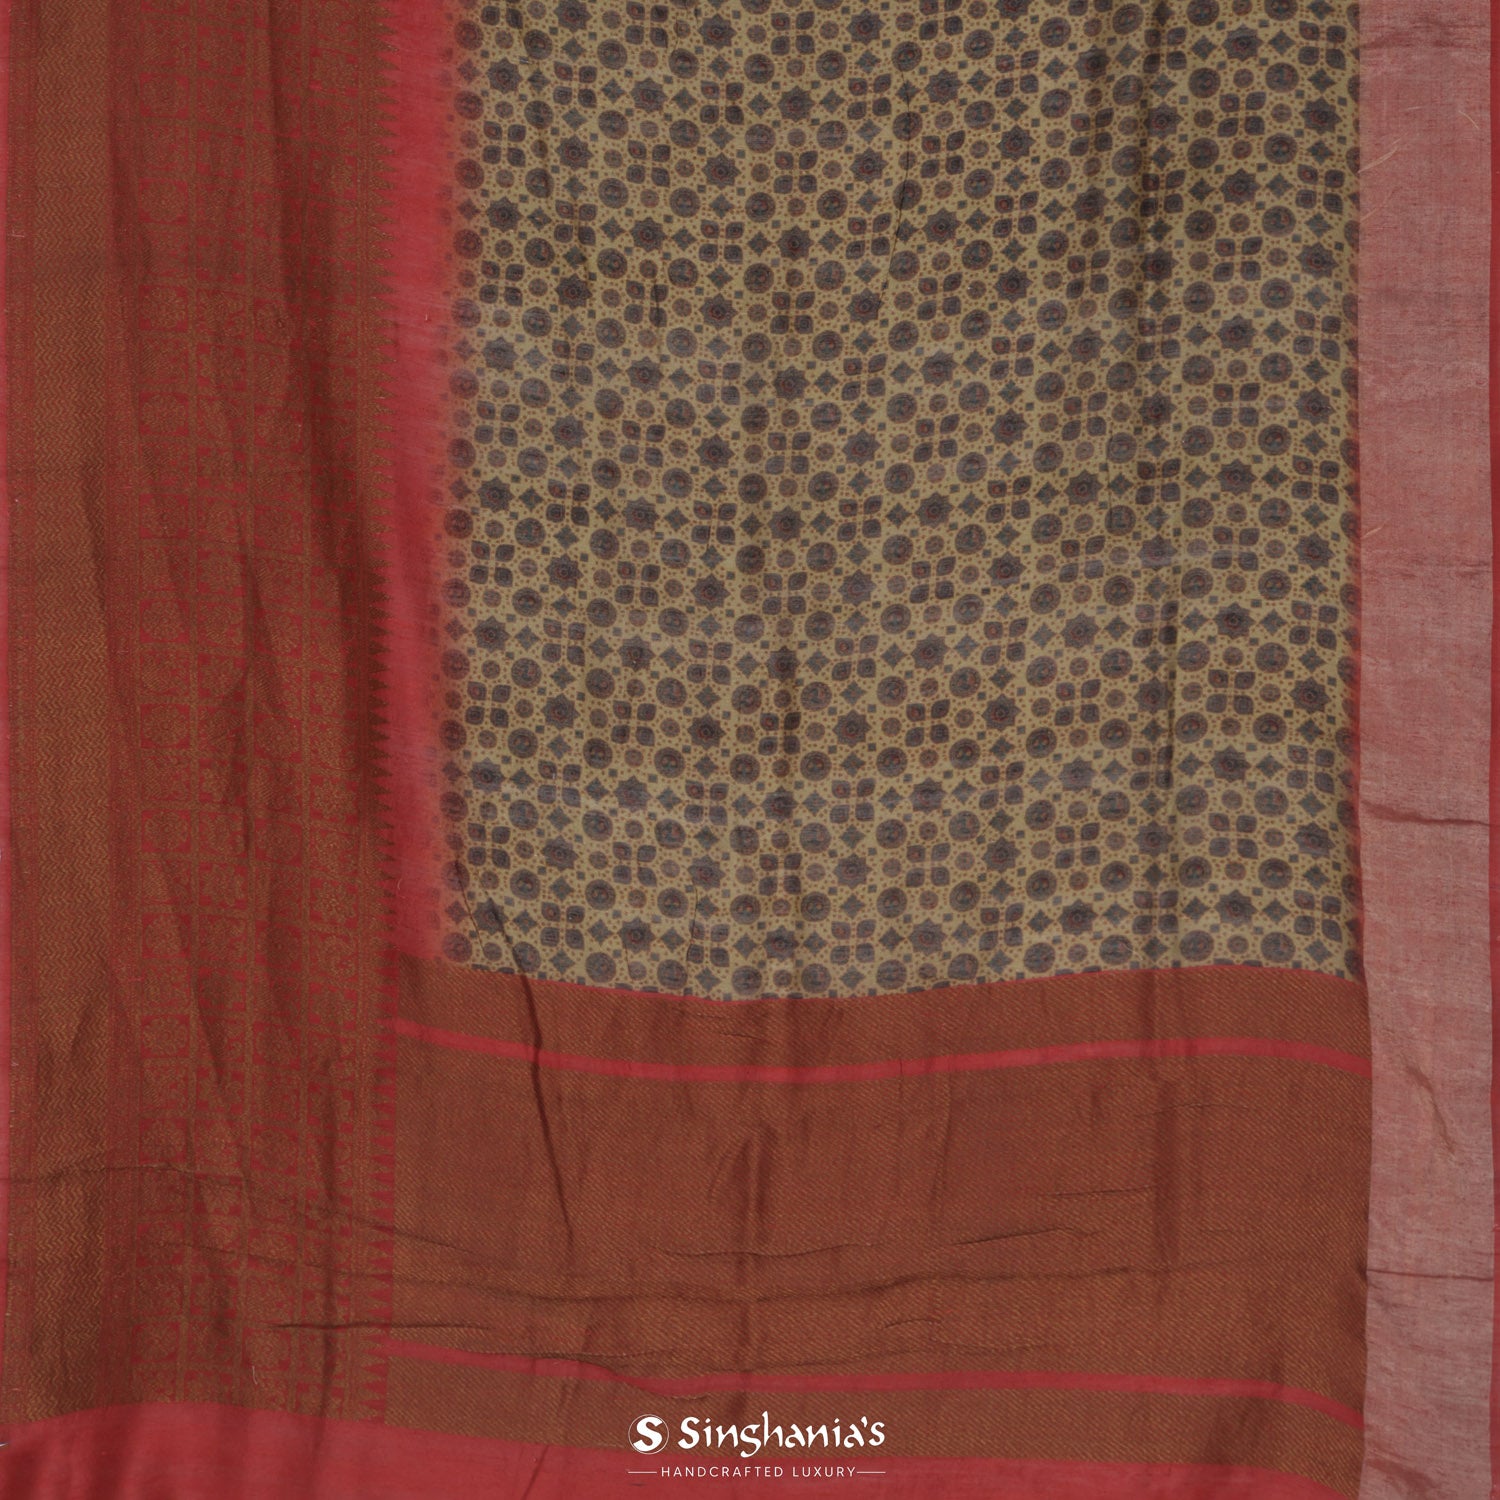 Light French Beige Printed Matka Saree With Ajrakh Inspired Pattern